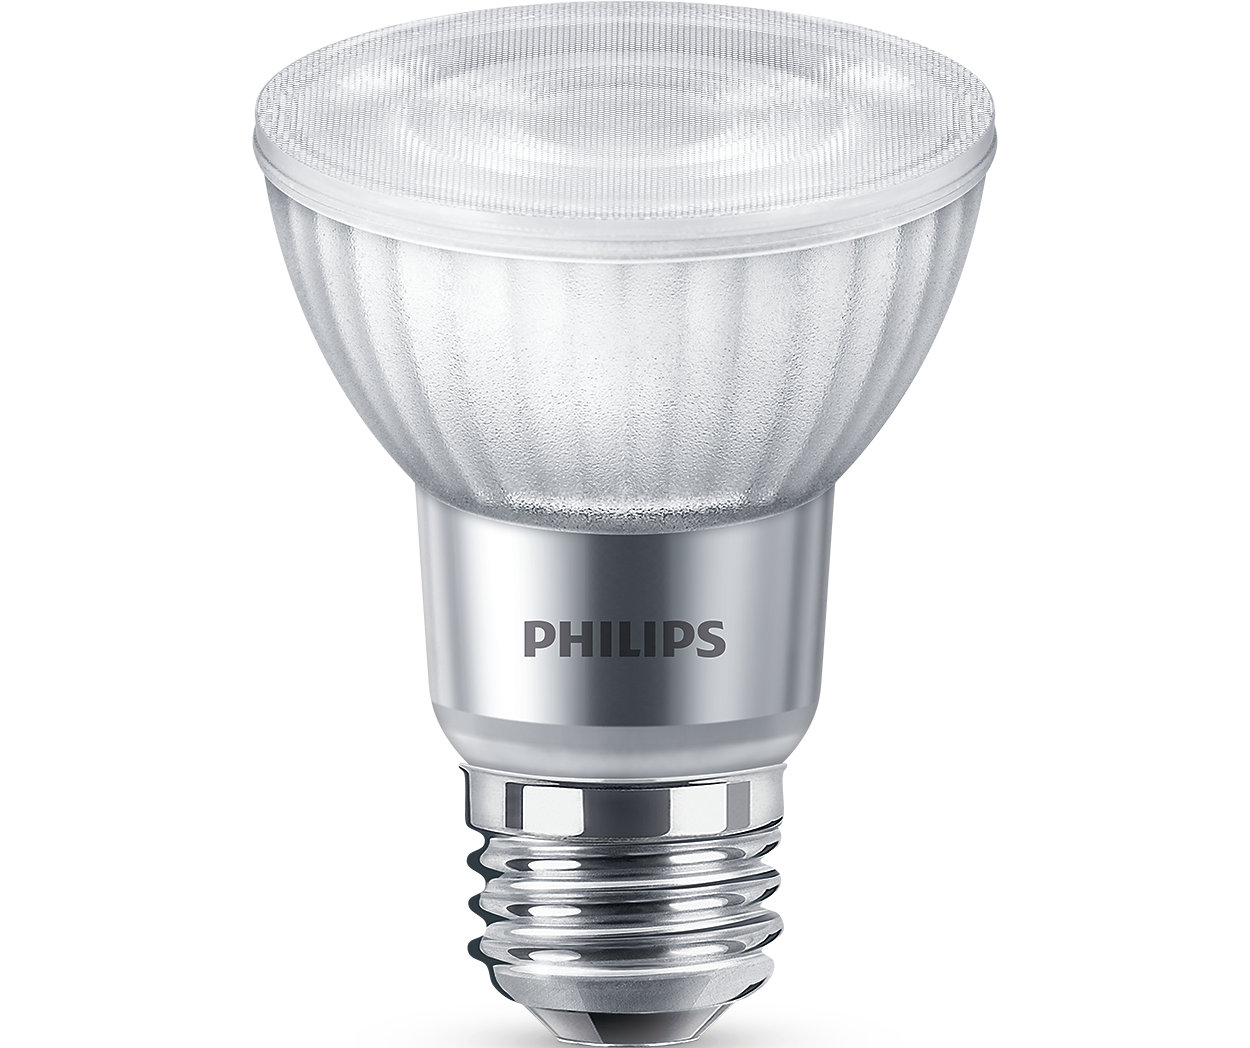 Extra bright, dimmable glass spot